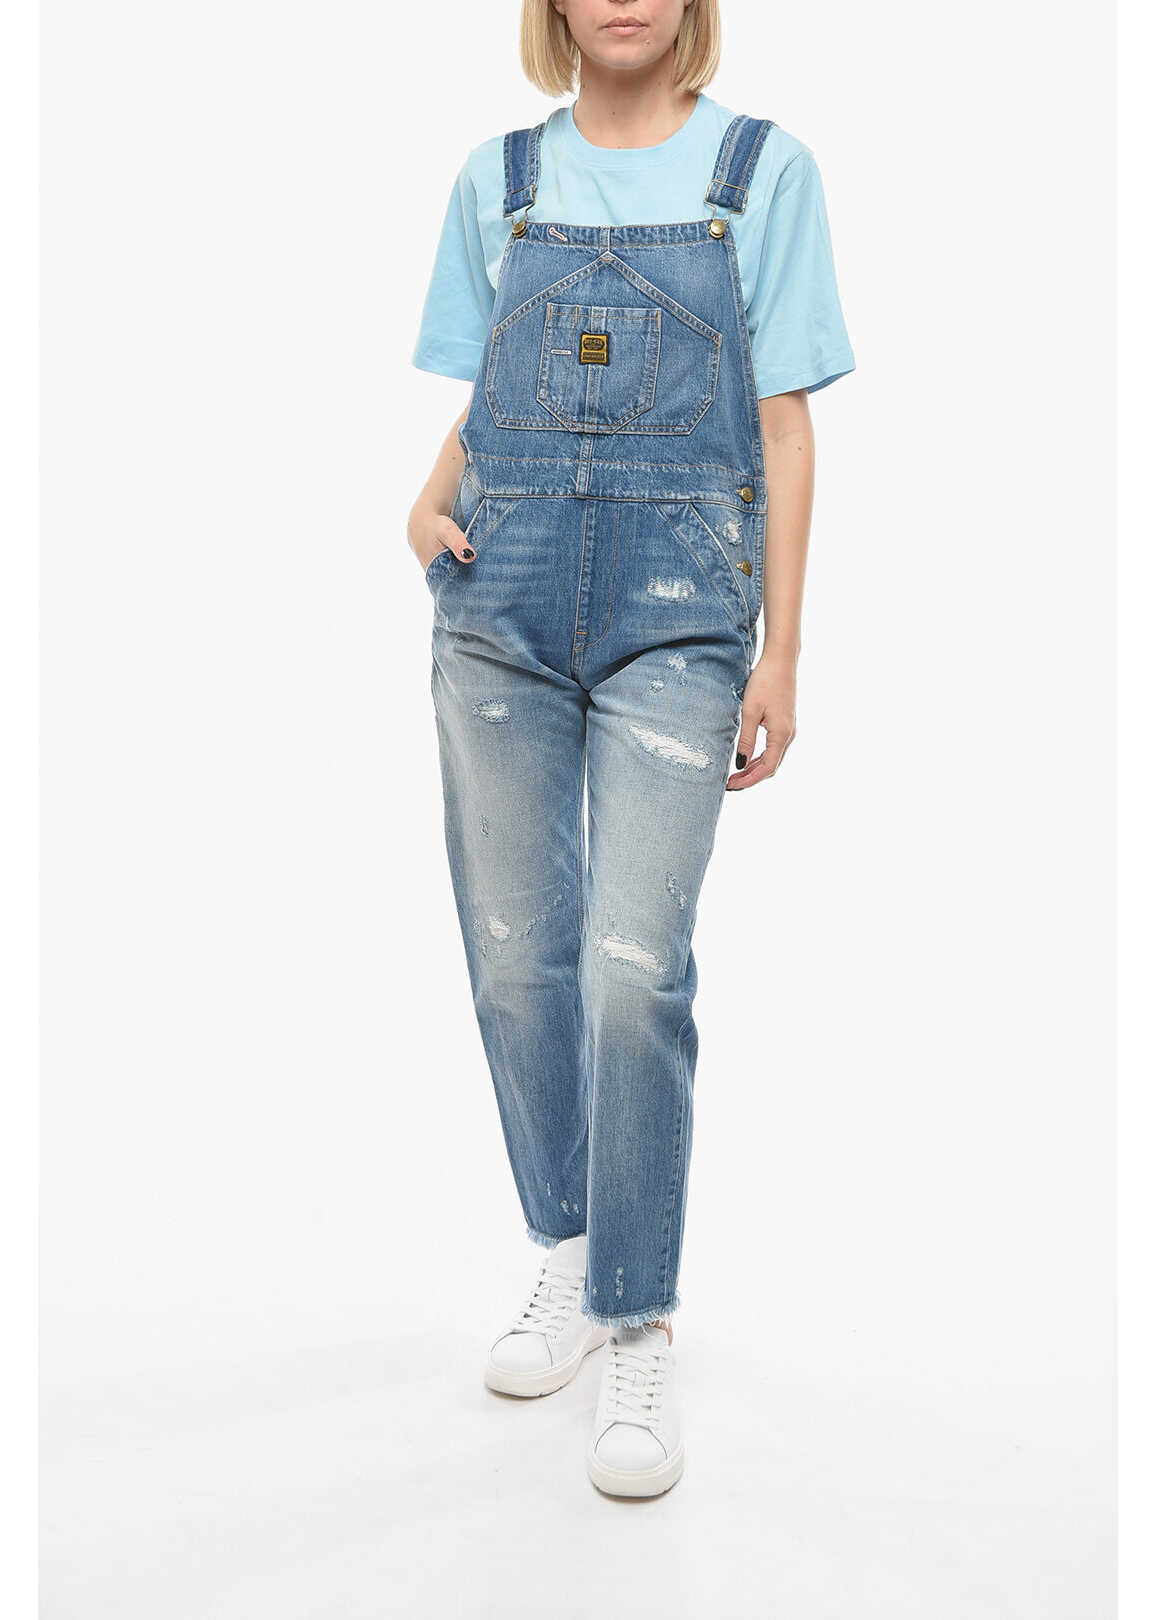 WASHINGTON DEE CEE Denim Washington Jumpsuit With Logoed And Golden Buttons Blue